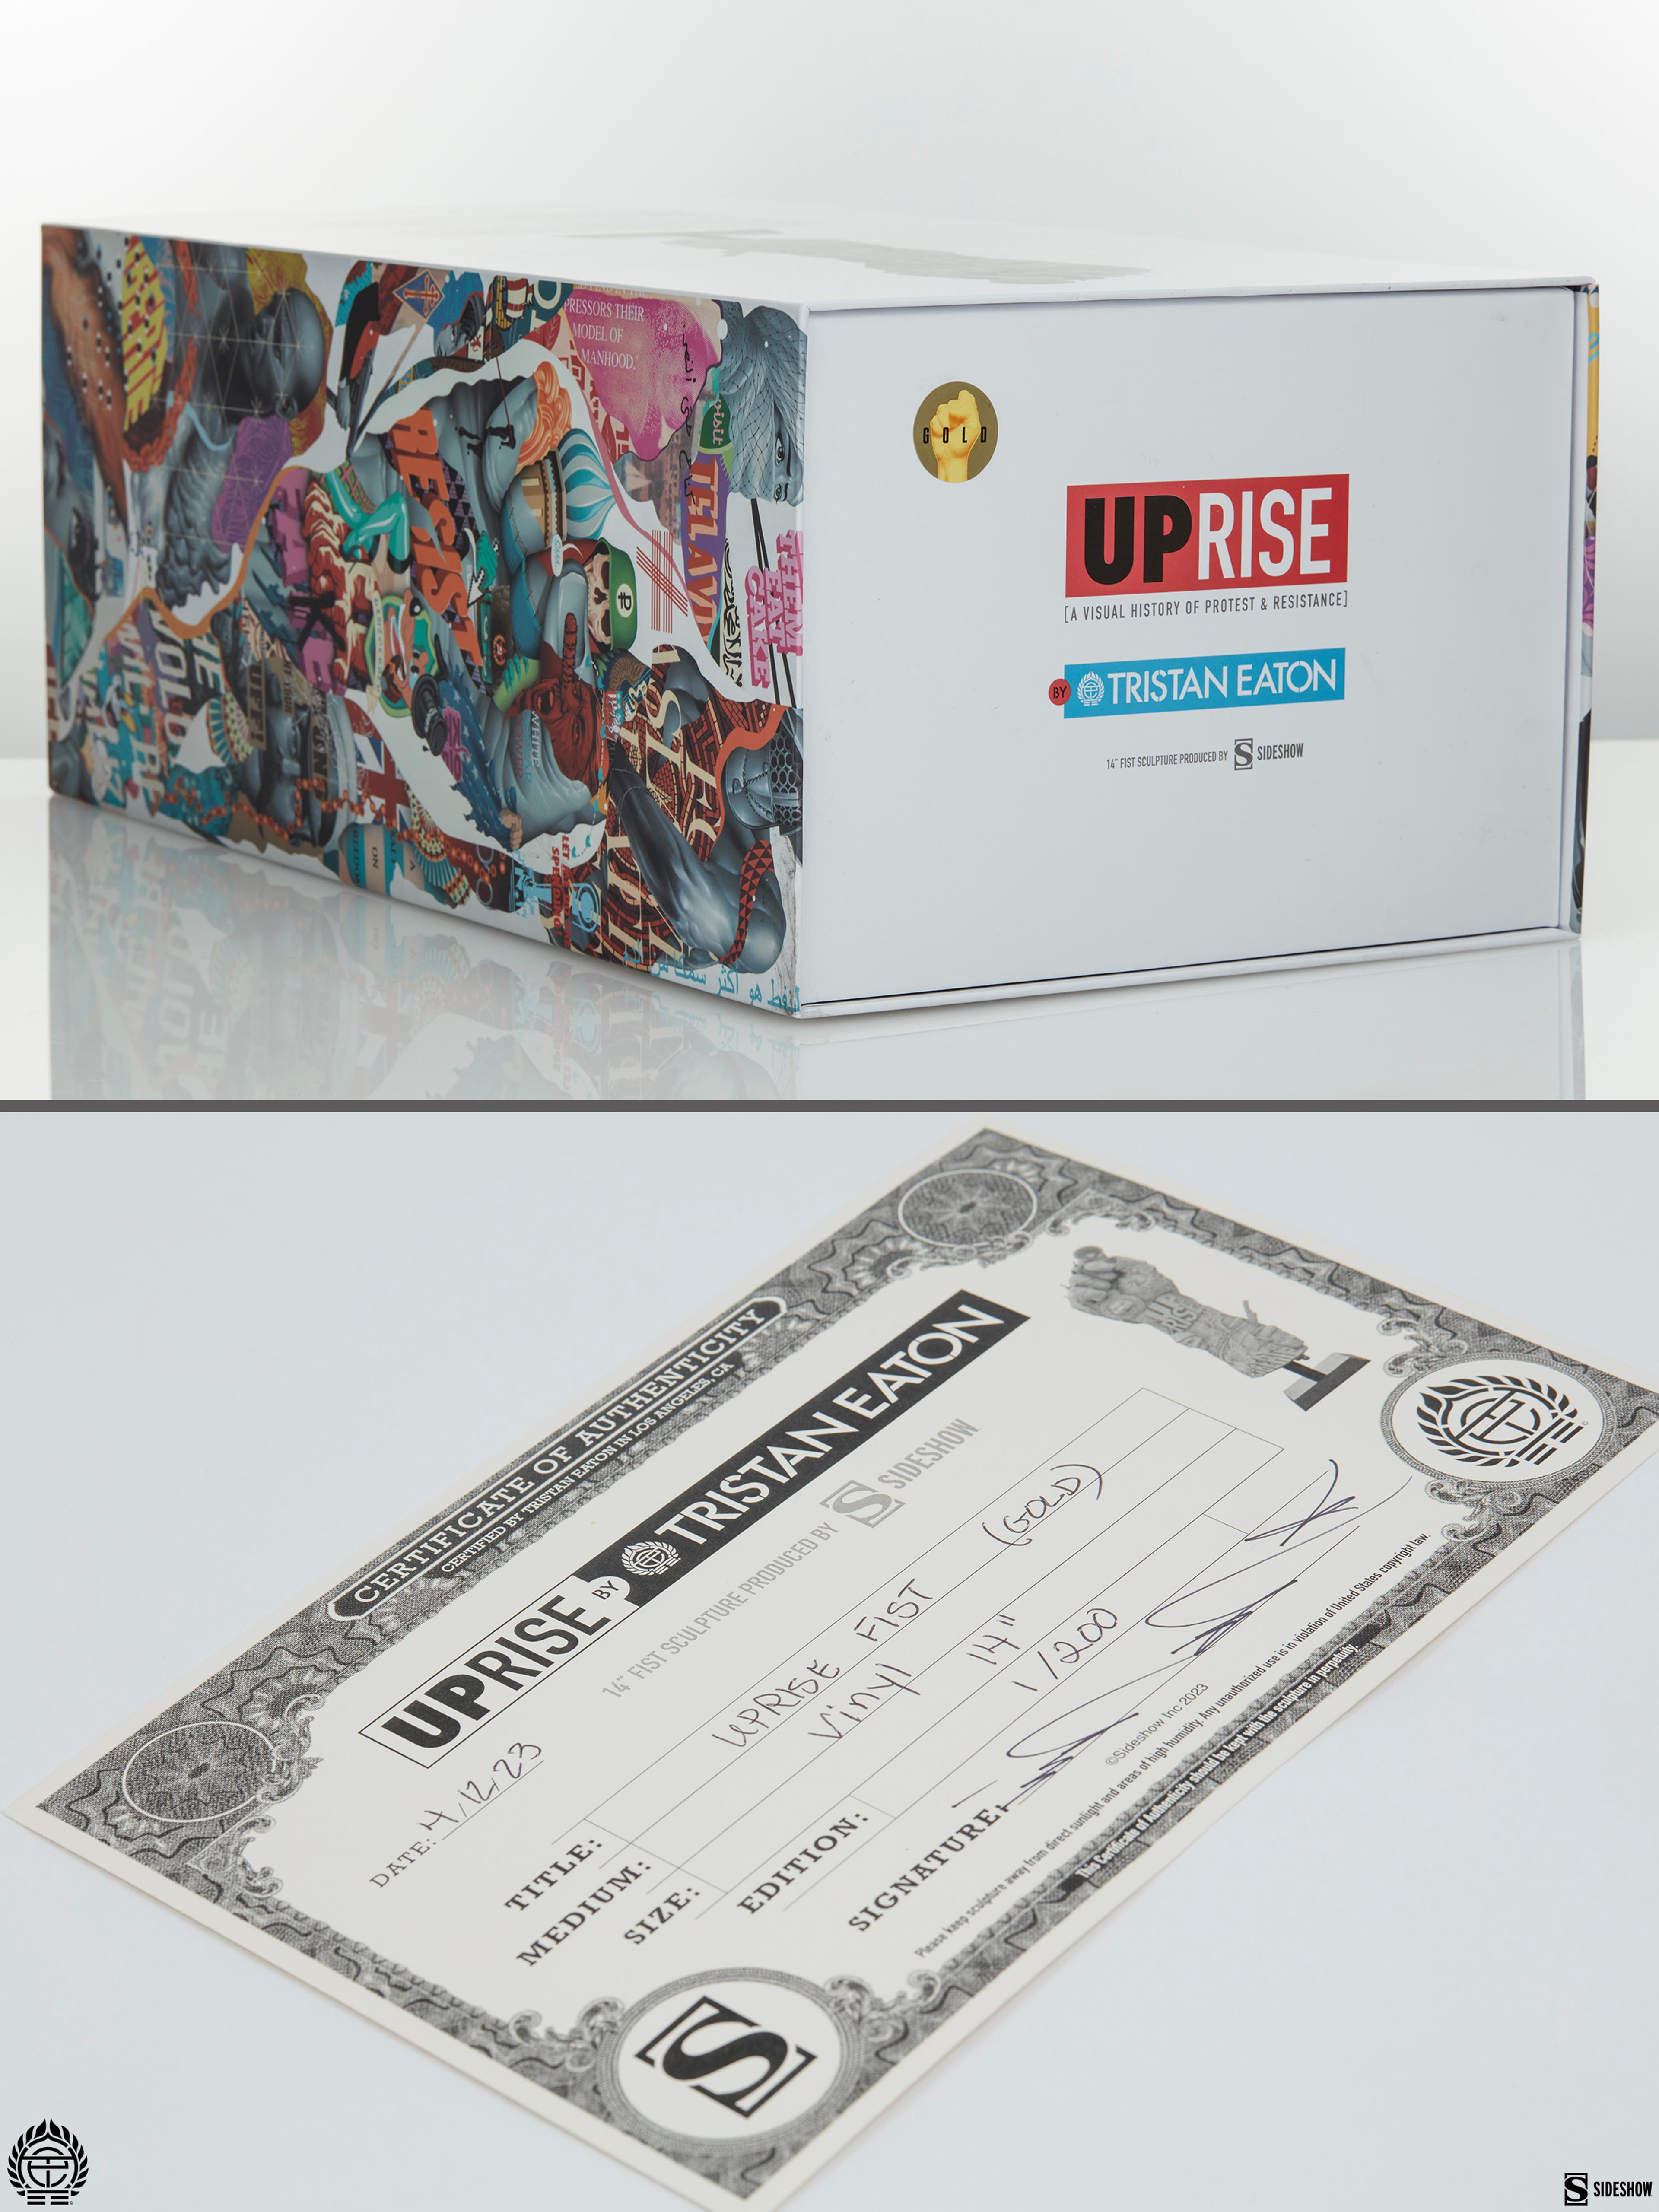 Alternate View 6 of UPRISE FIST Fine Art Statue by Tristan Eaton x Sideshow